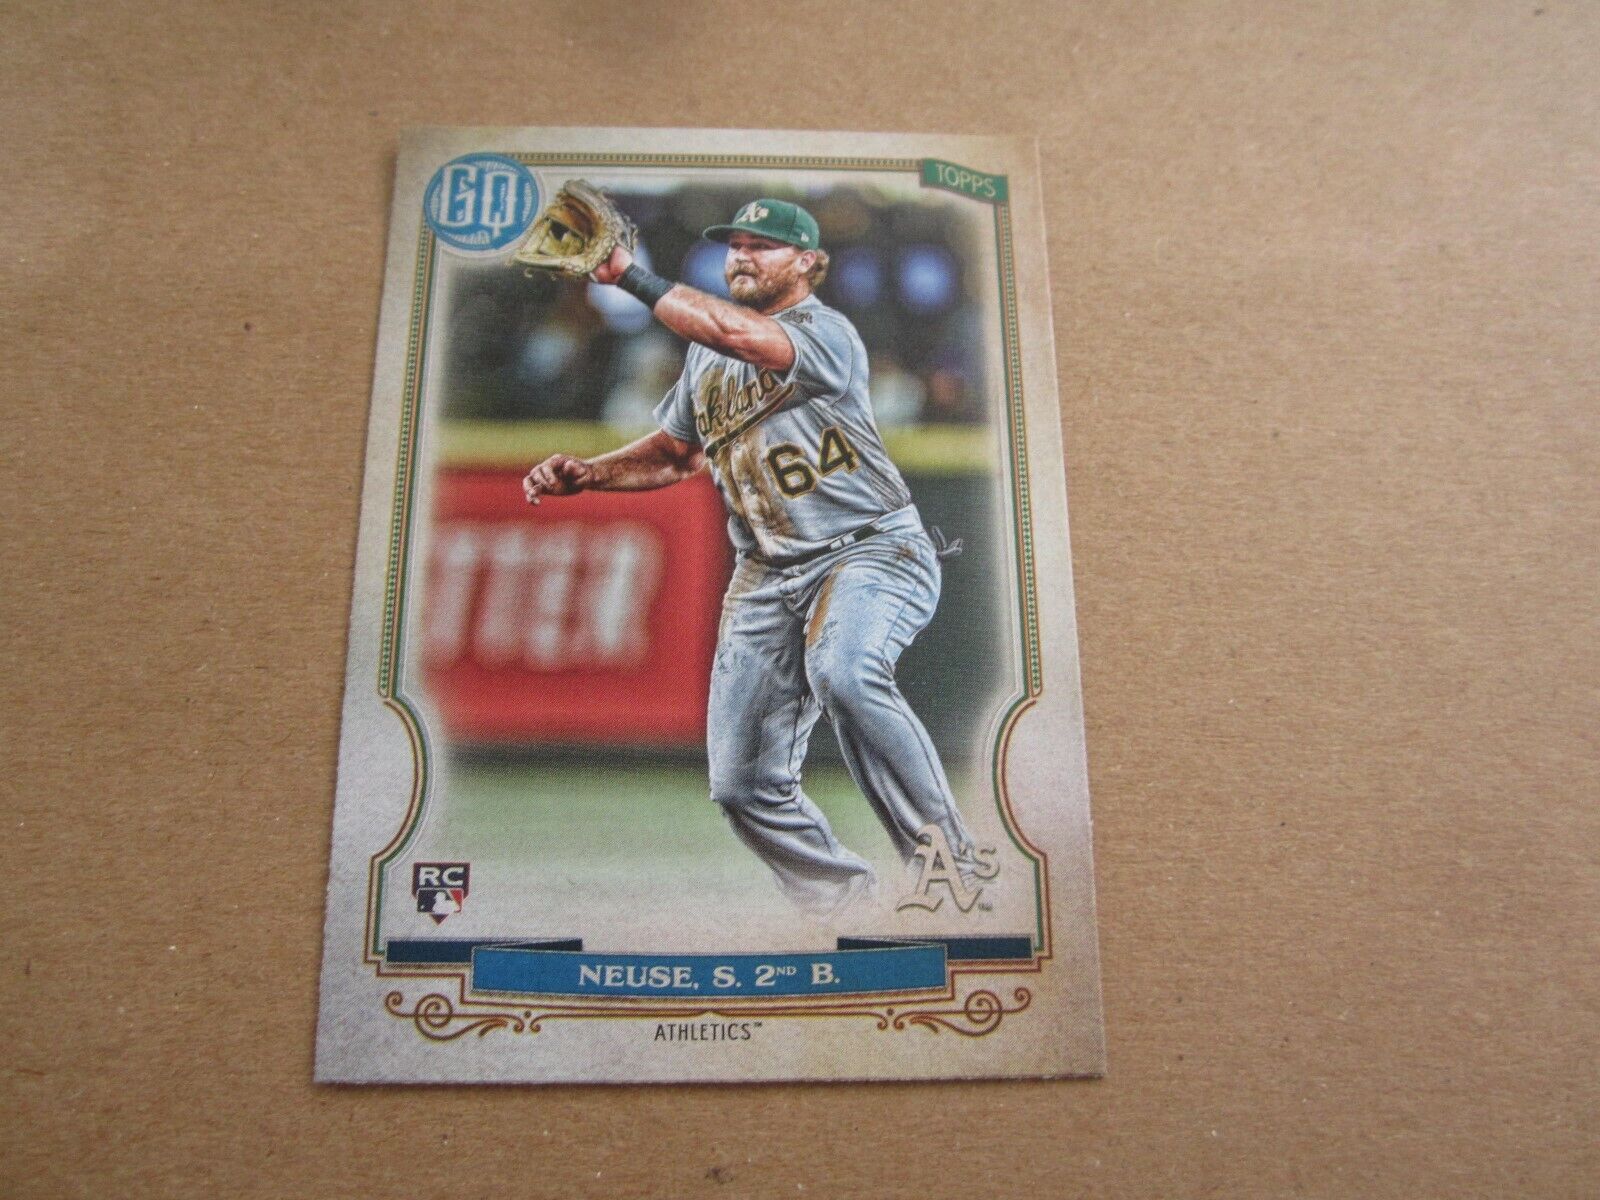  2020 Topps GYPSY QUEEN MLB ROOKIE CARD SHELDON NEUSE ATHLETICS #217